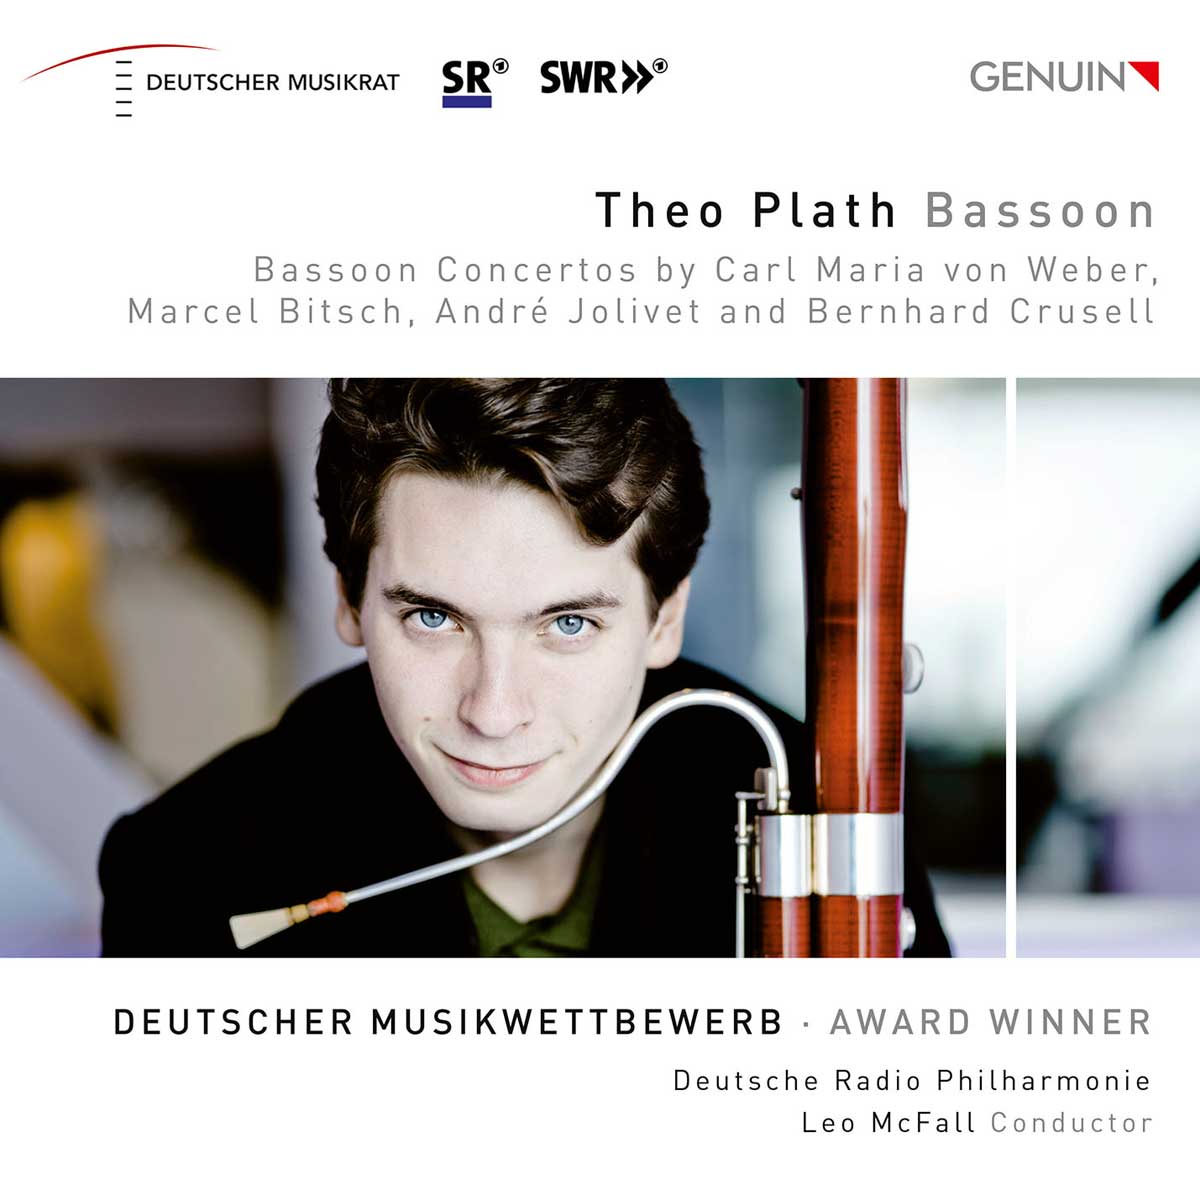 CD album cover 'Theo Plath, Bassoon' (GEN 20683) with Theo Plath ...